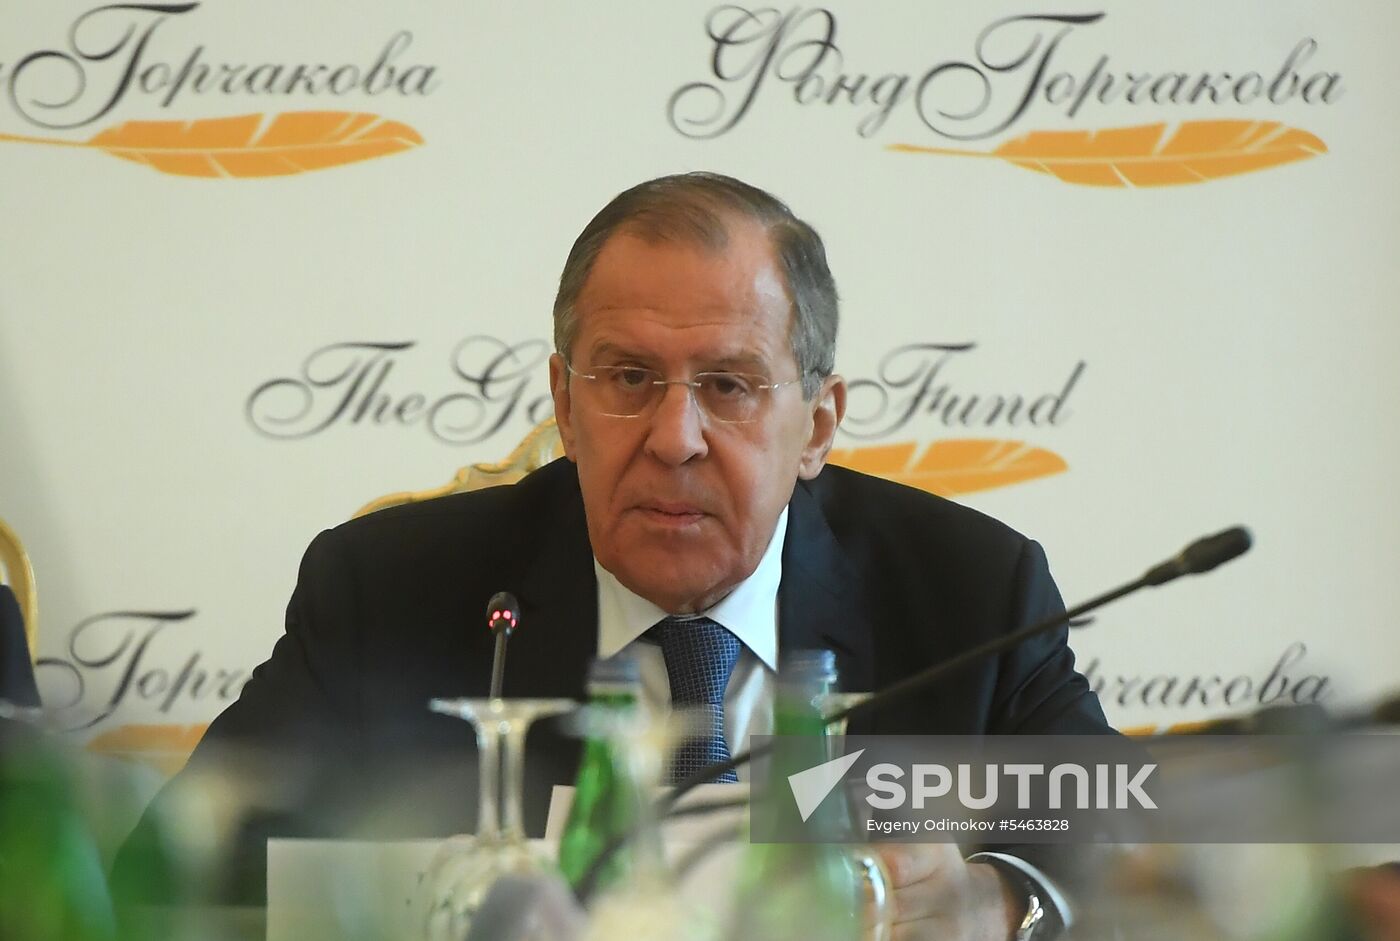 Meeting of Gorchakov Public Diplomacy Fund Supervisory Board with participation of Russian Foreign Minister Sergei Lavrov